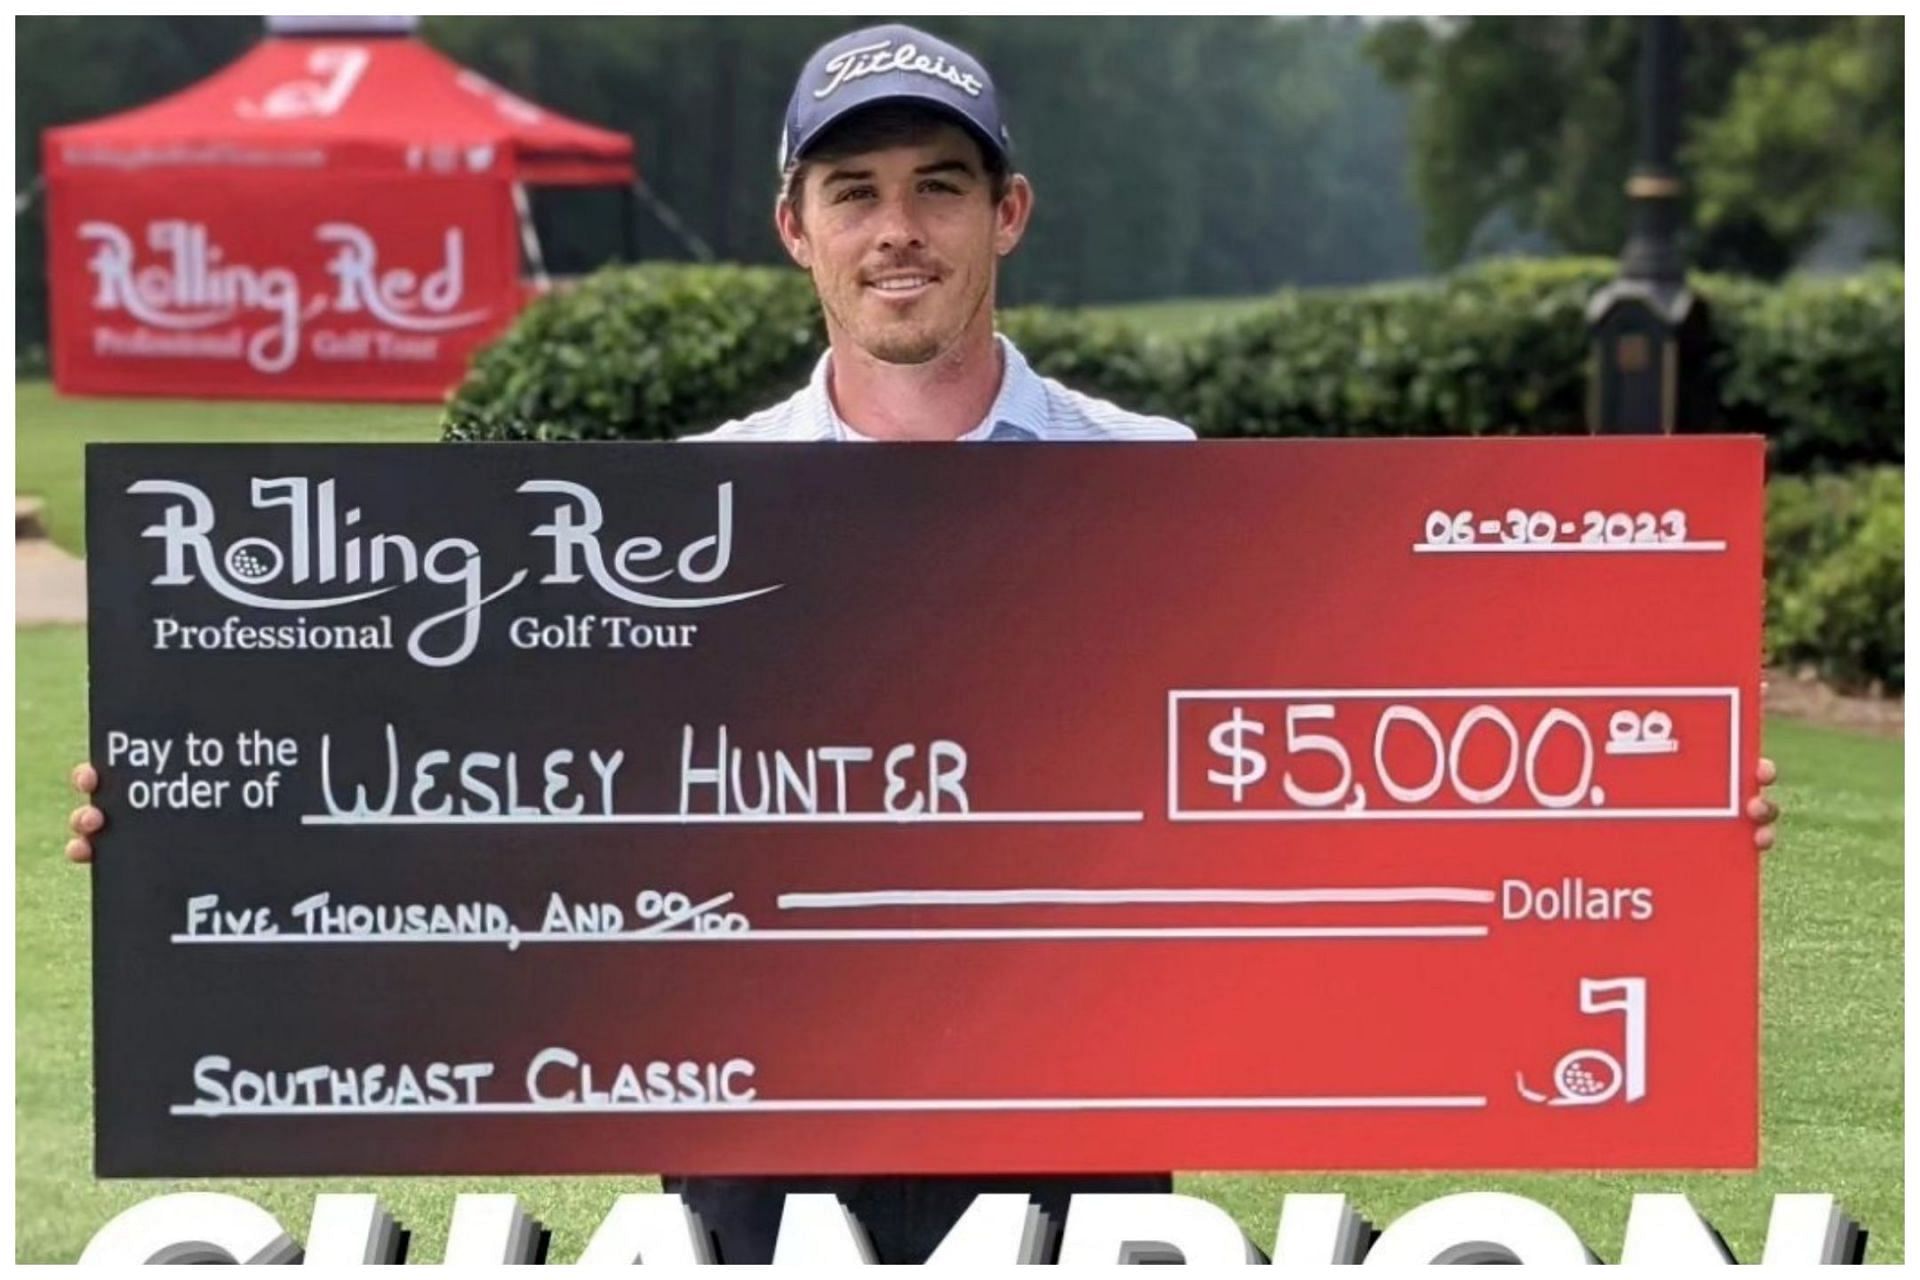 Wesley Hunter poses with a check after winning the title on the Rolling Red Golf Tour&#039;s South East Classic (Image via Twitter.com/RollingRedGolf).